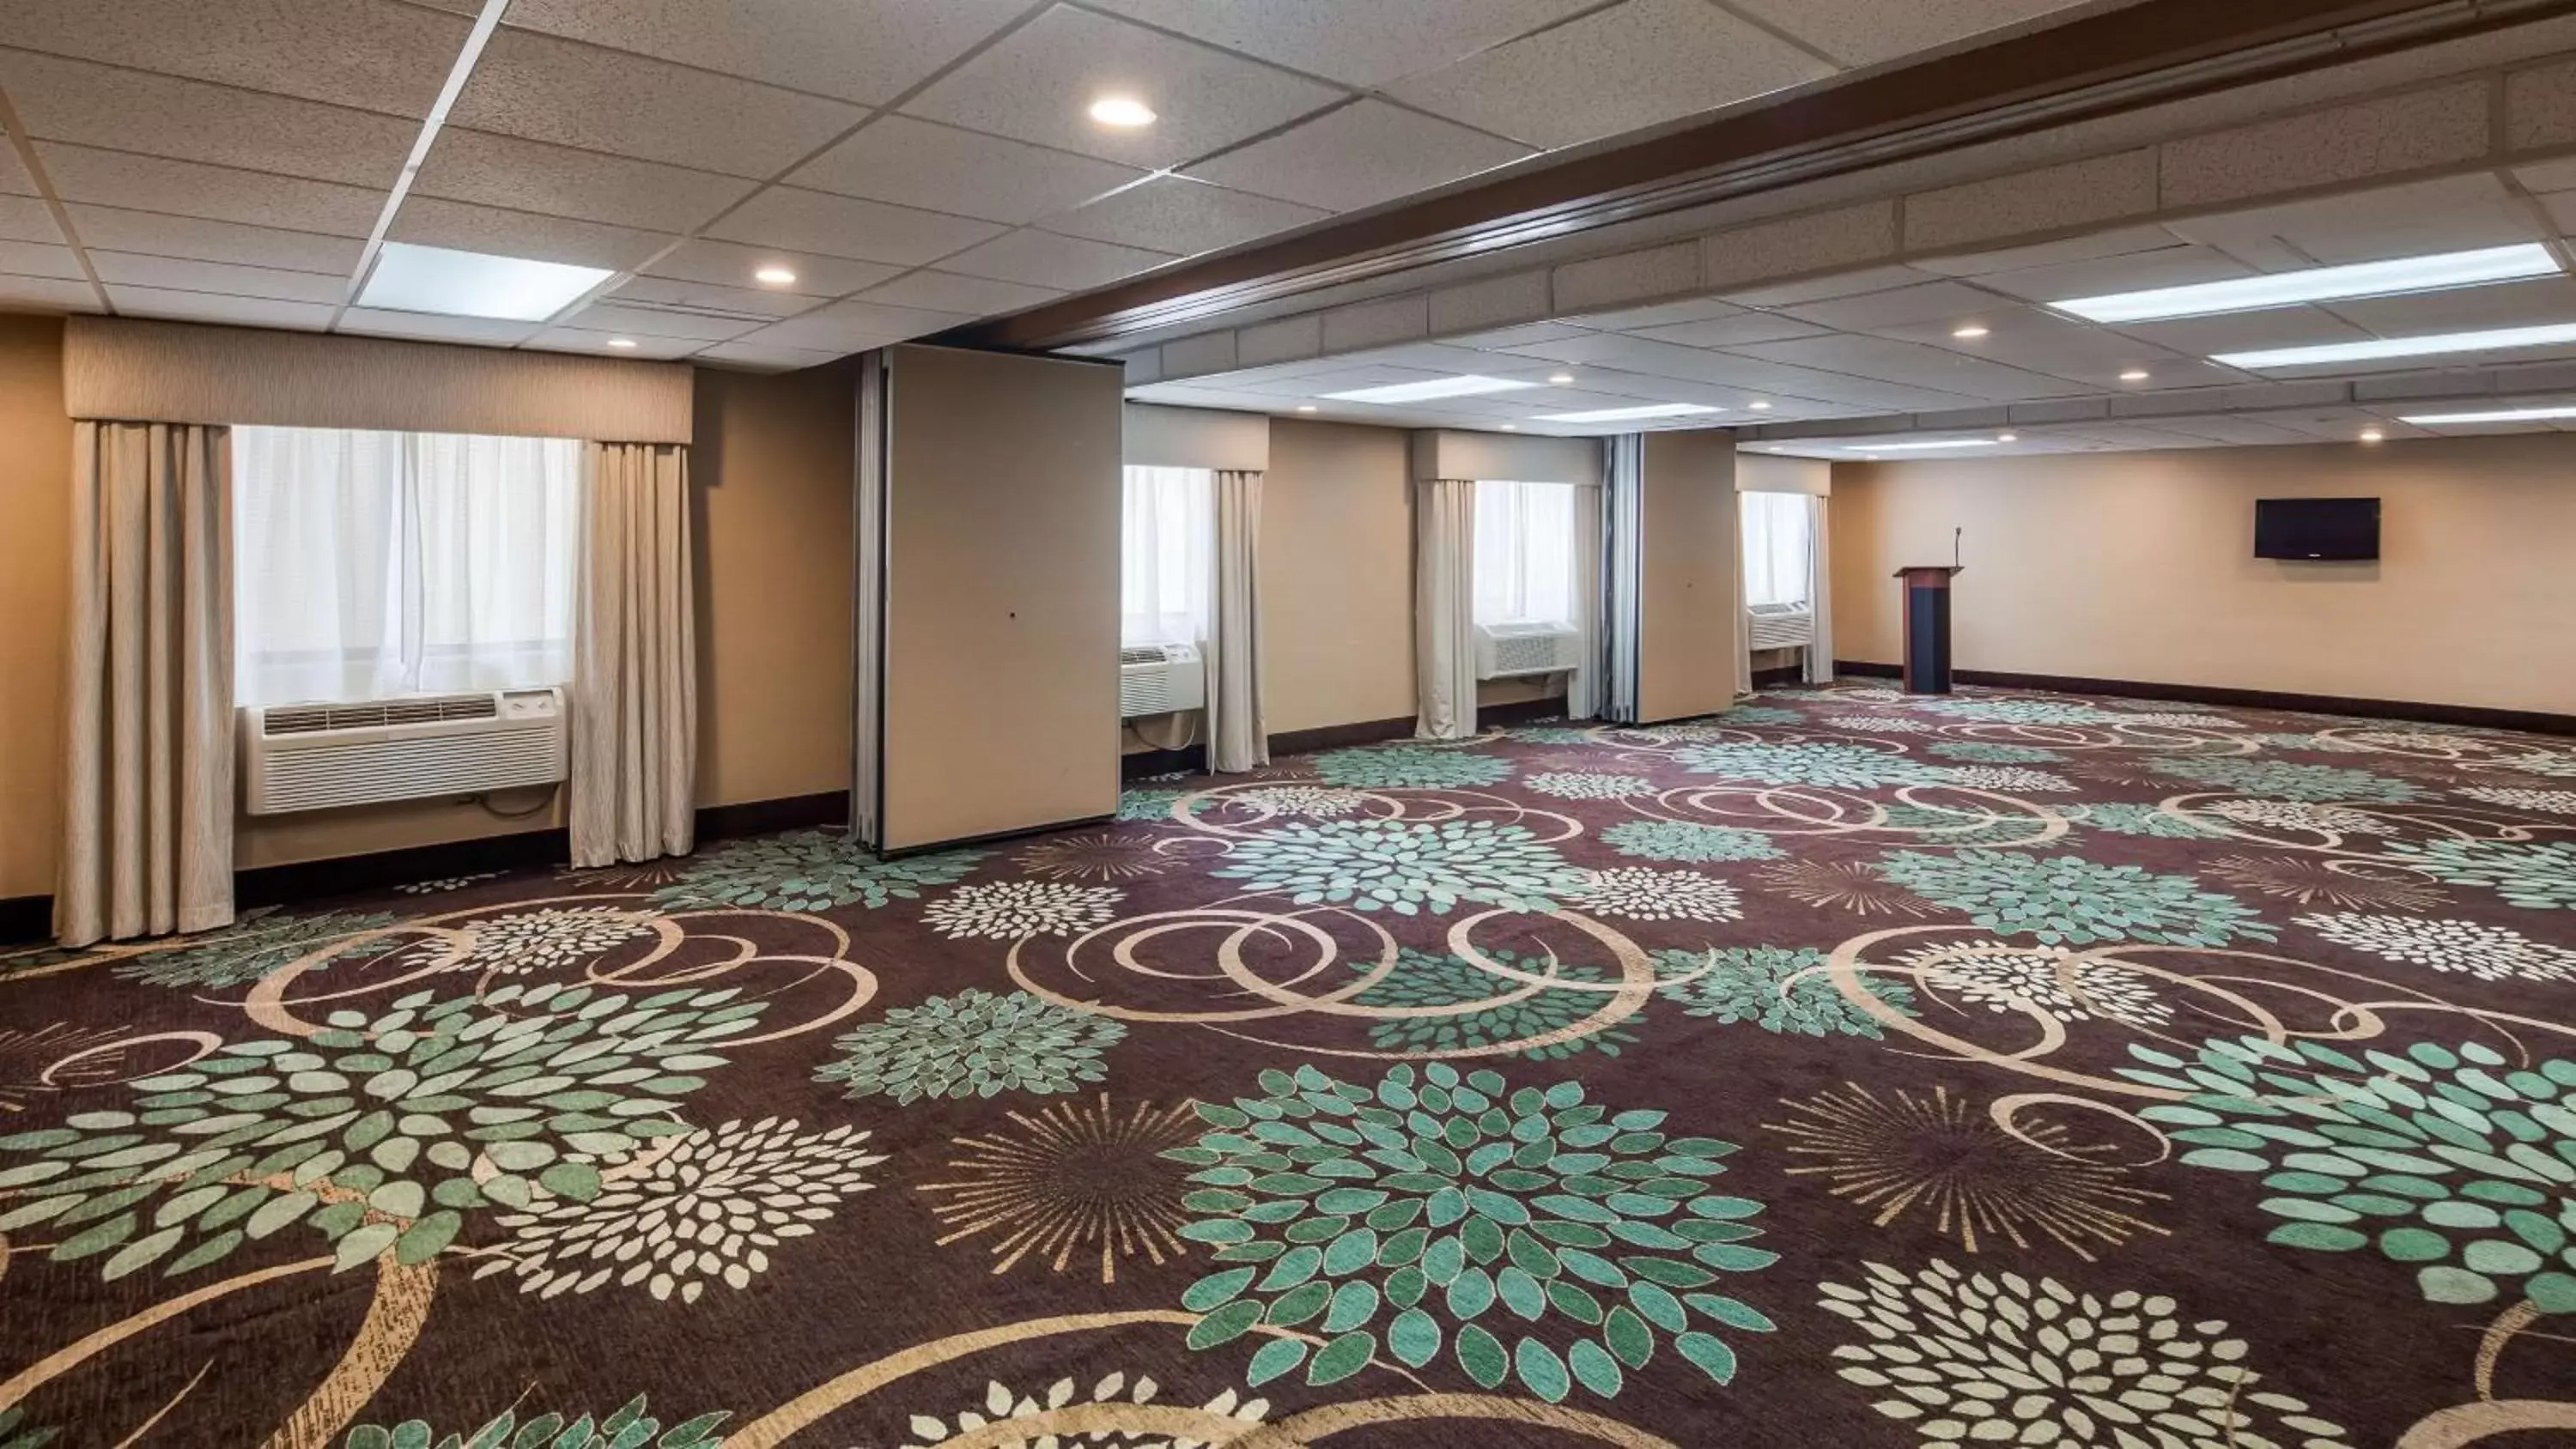 On site, Banquet Facilities in Best Western Detroit Livonia